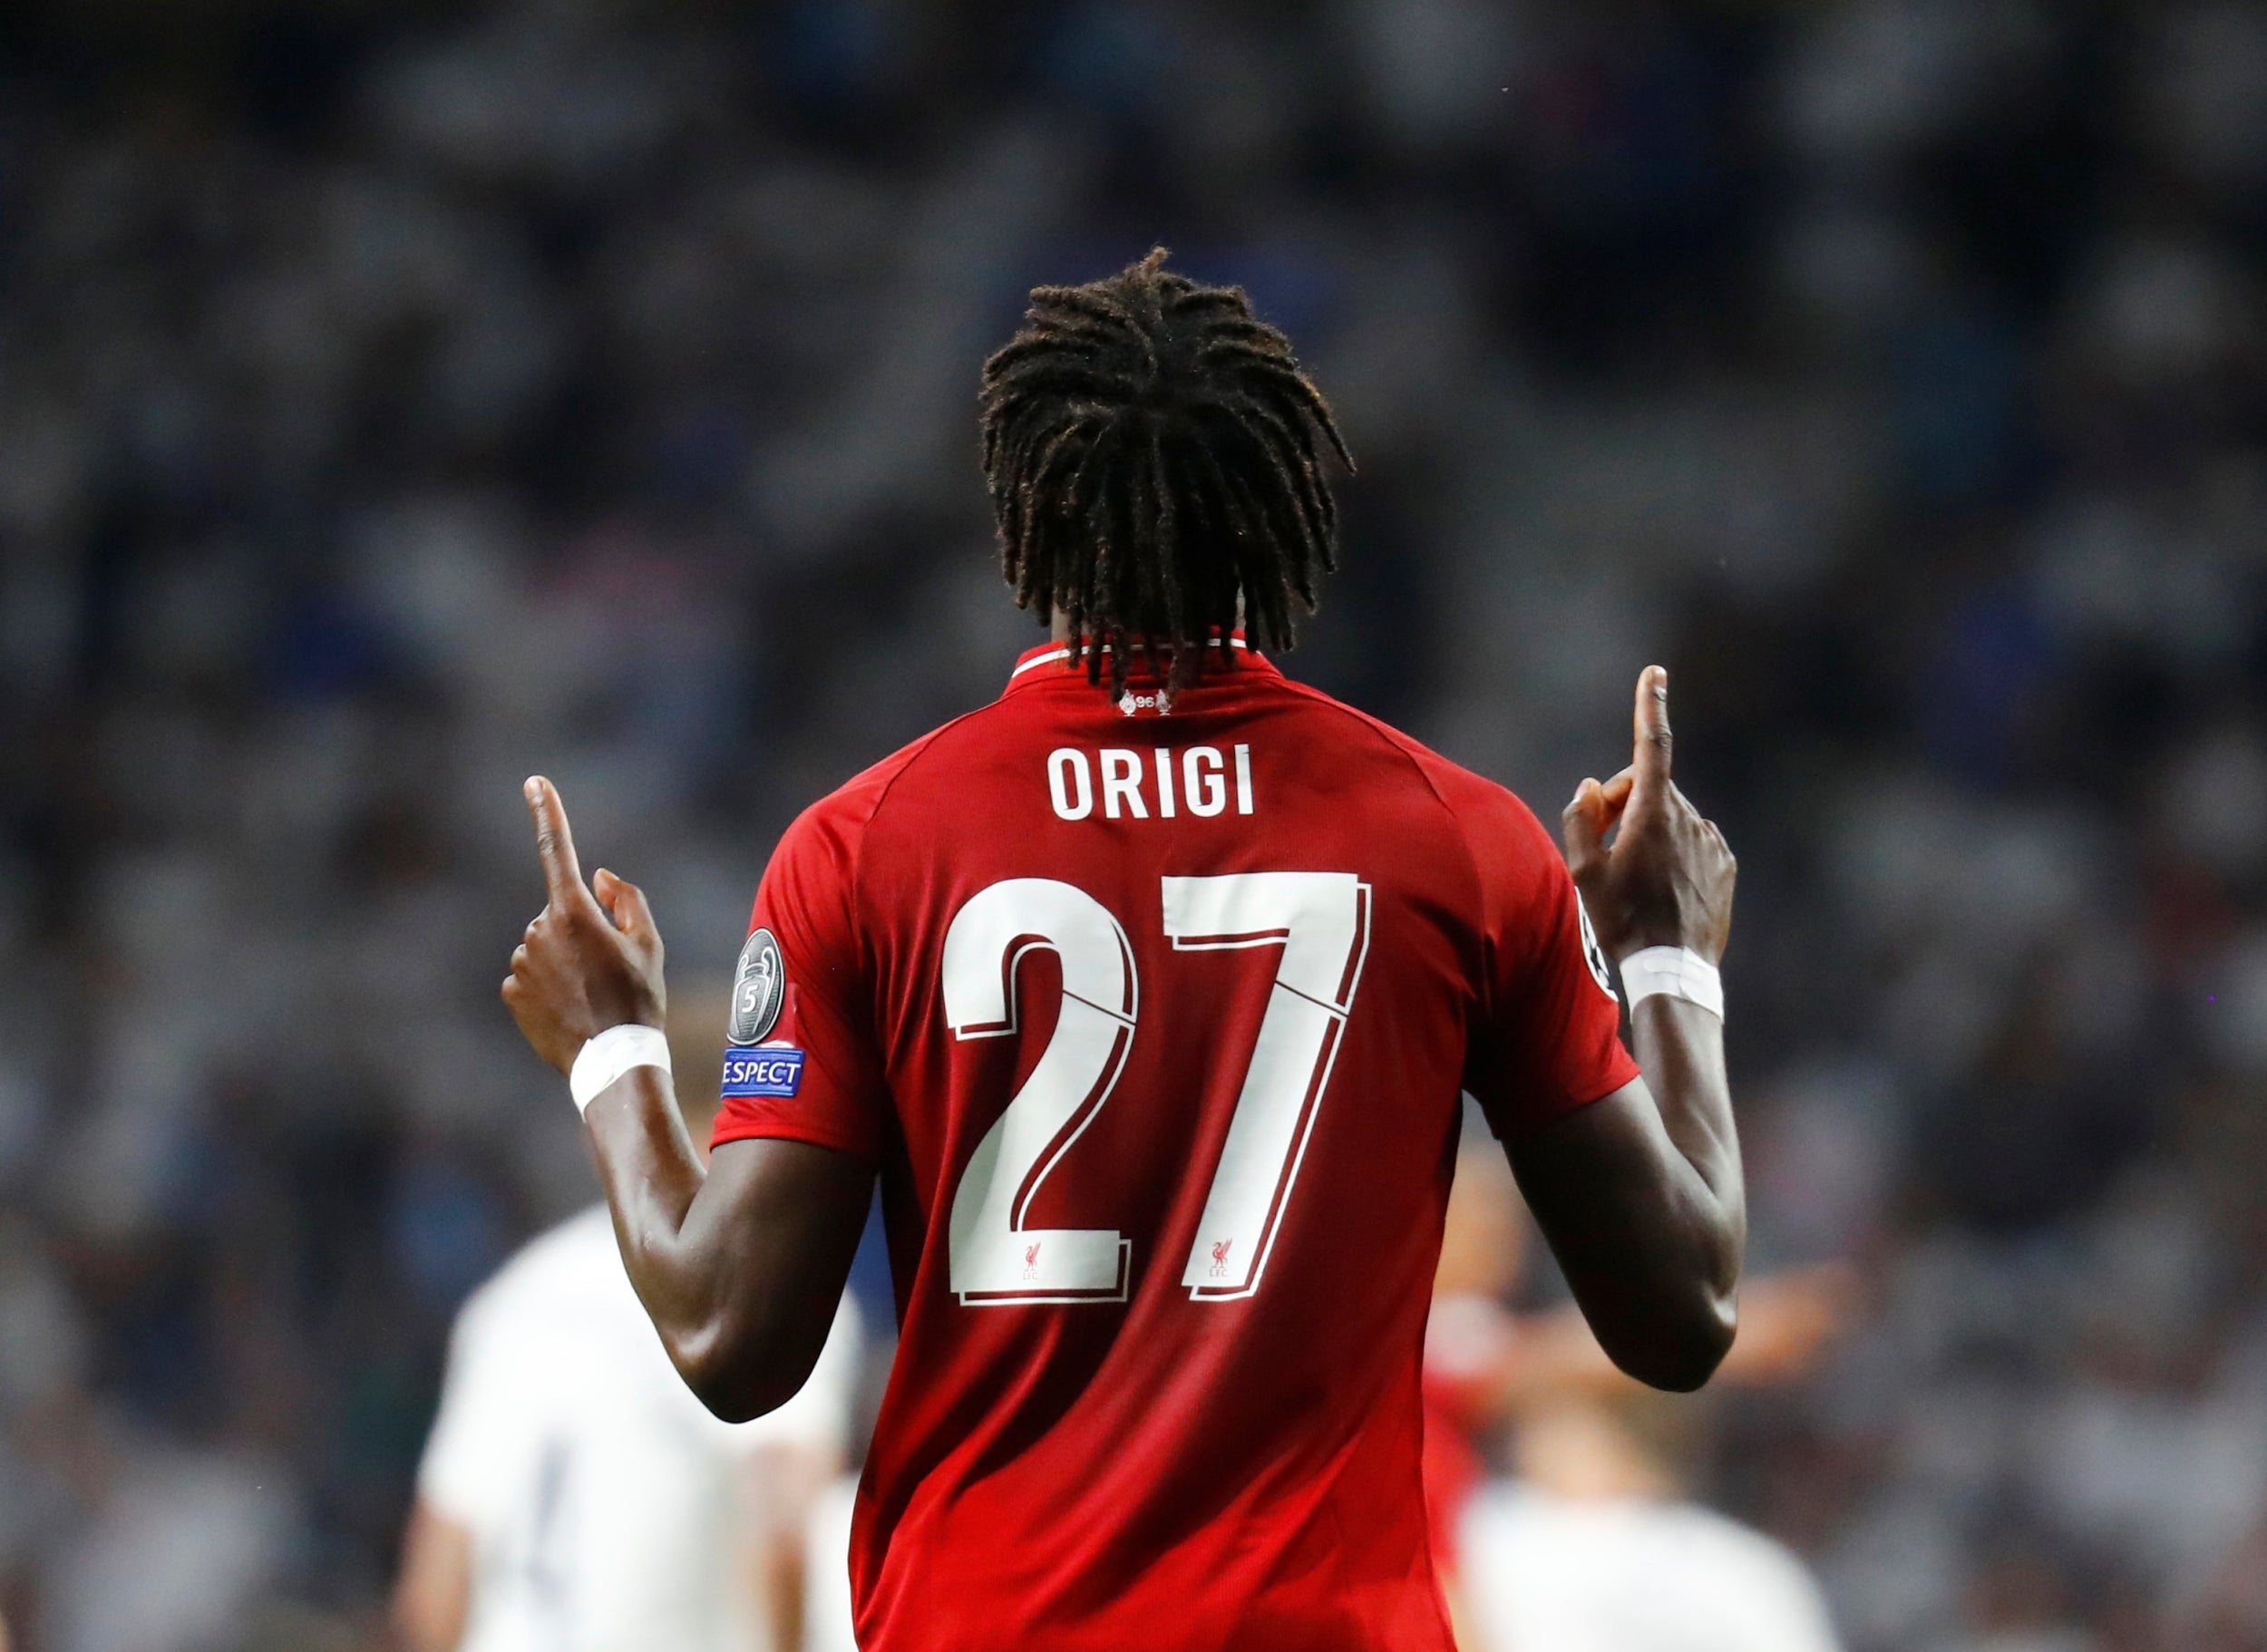 Divock Origi is likely to sign a deal to extend his stay at Anfield